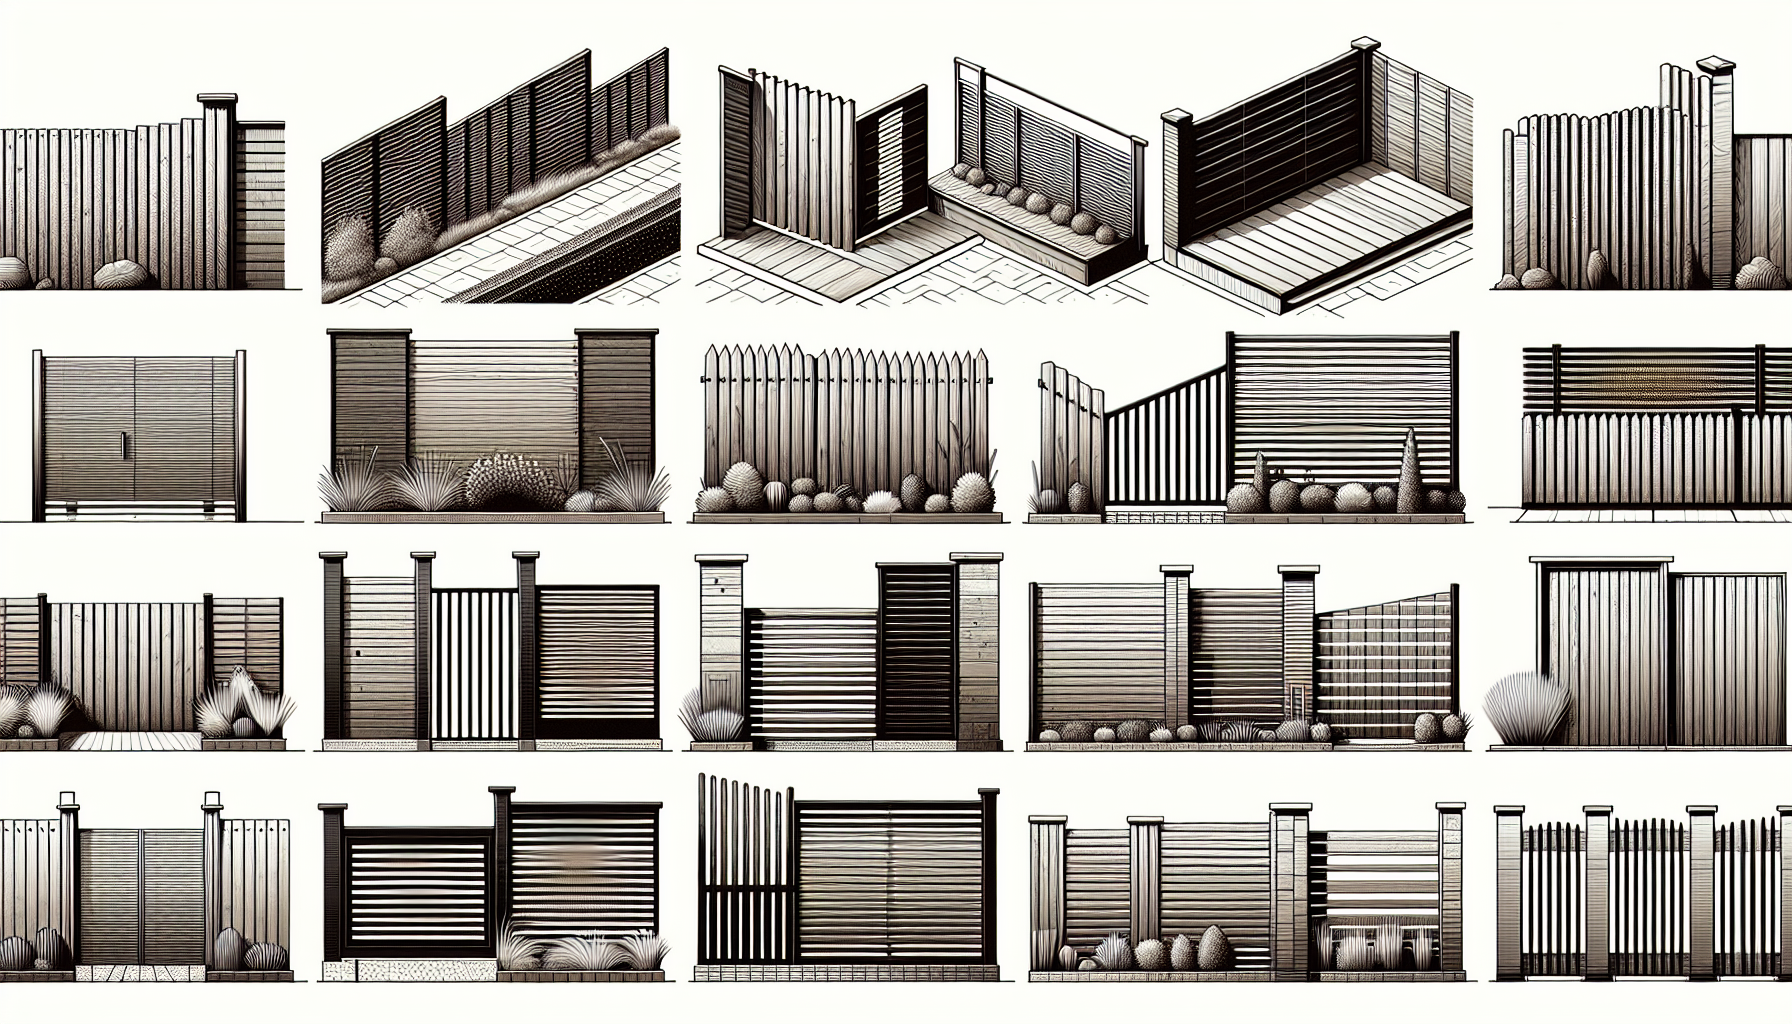 Horizontal and vertical fence design styles